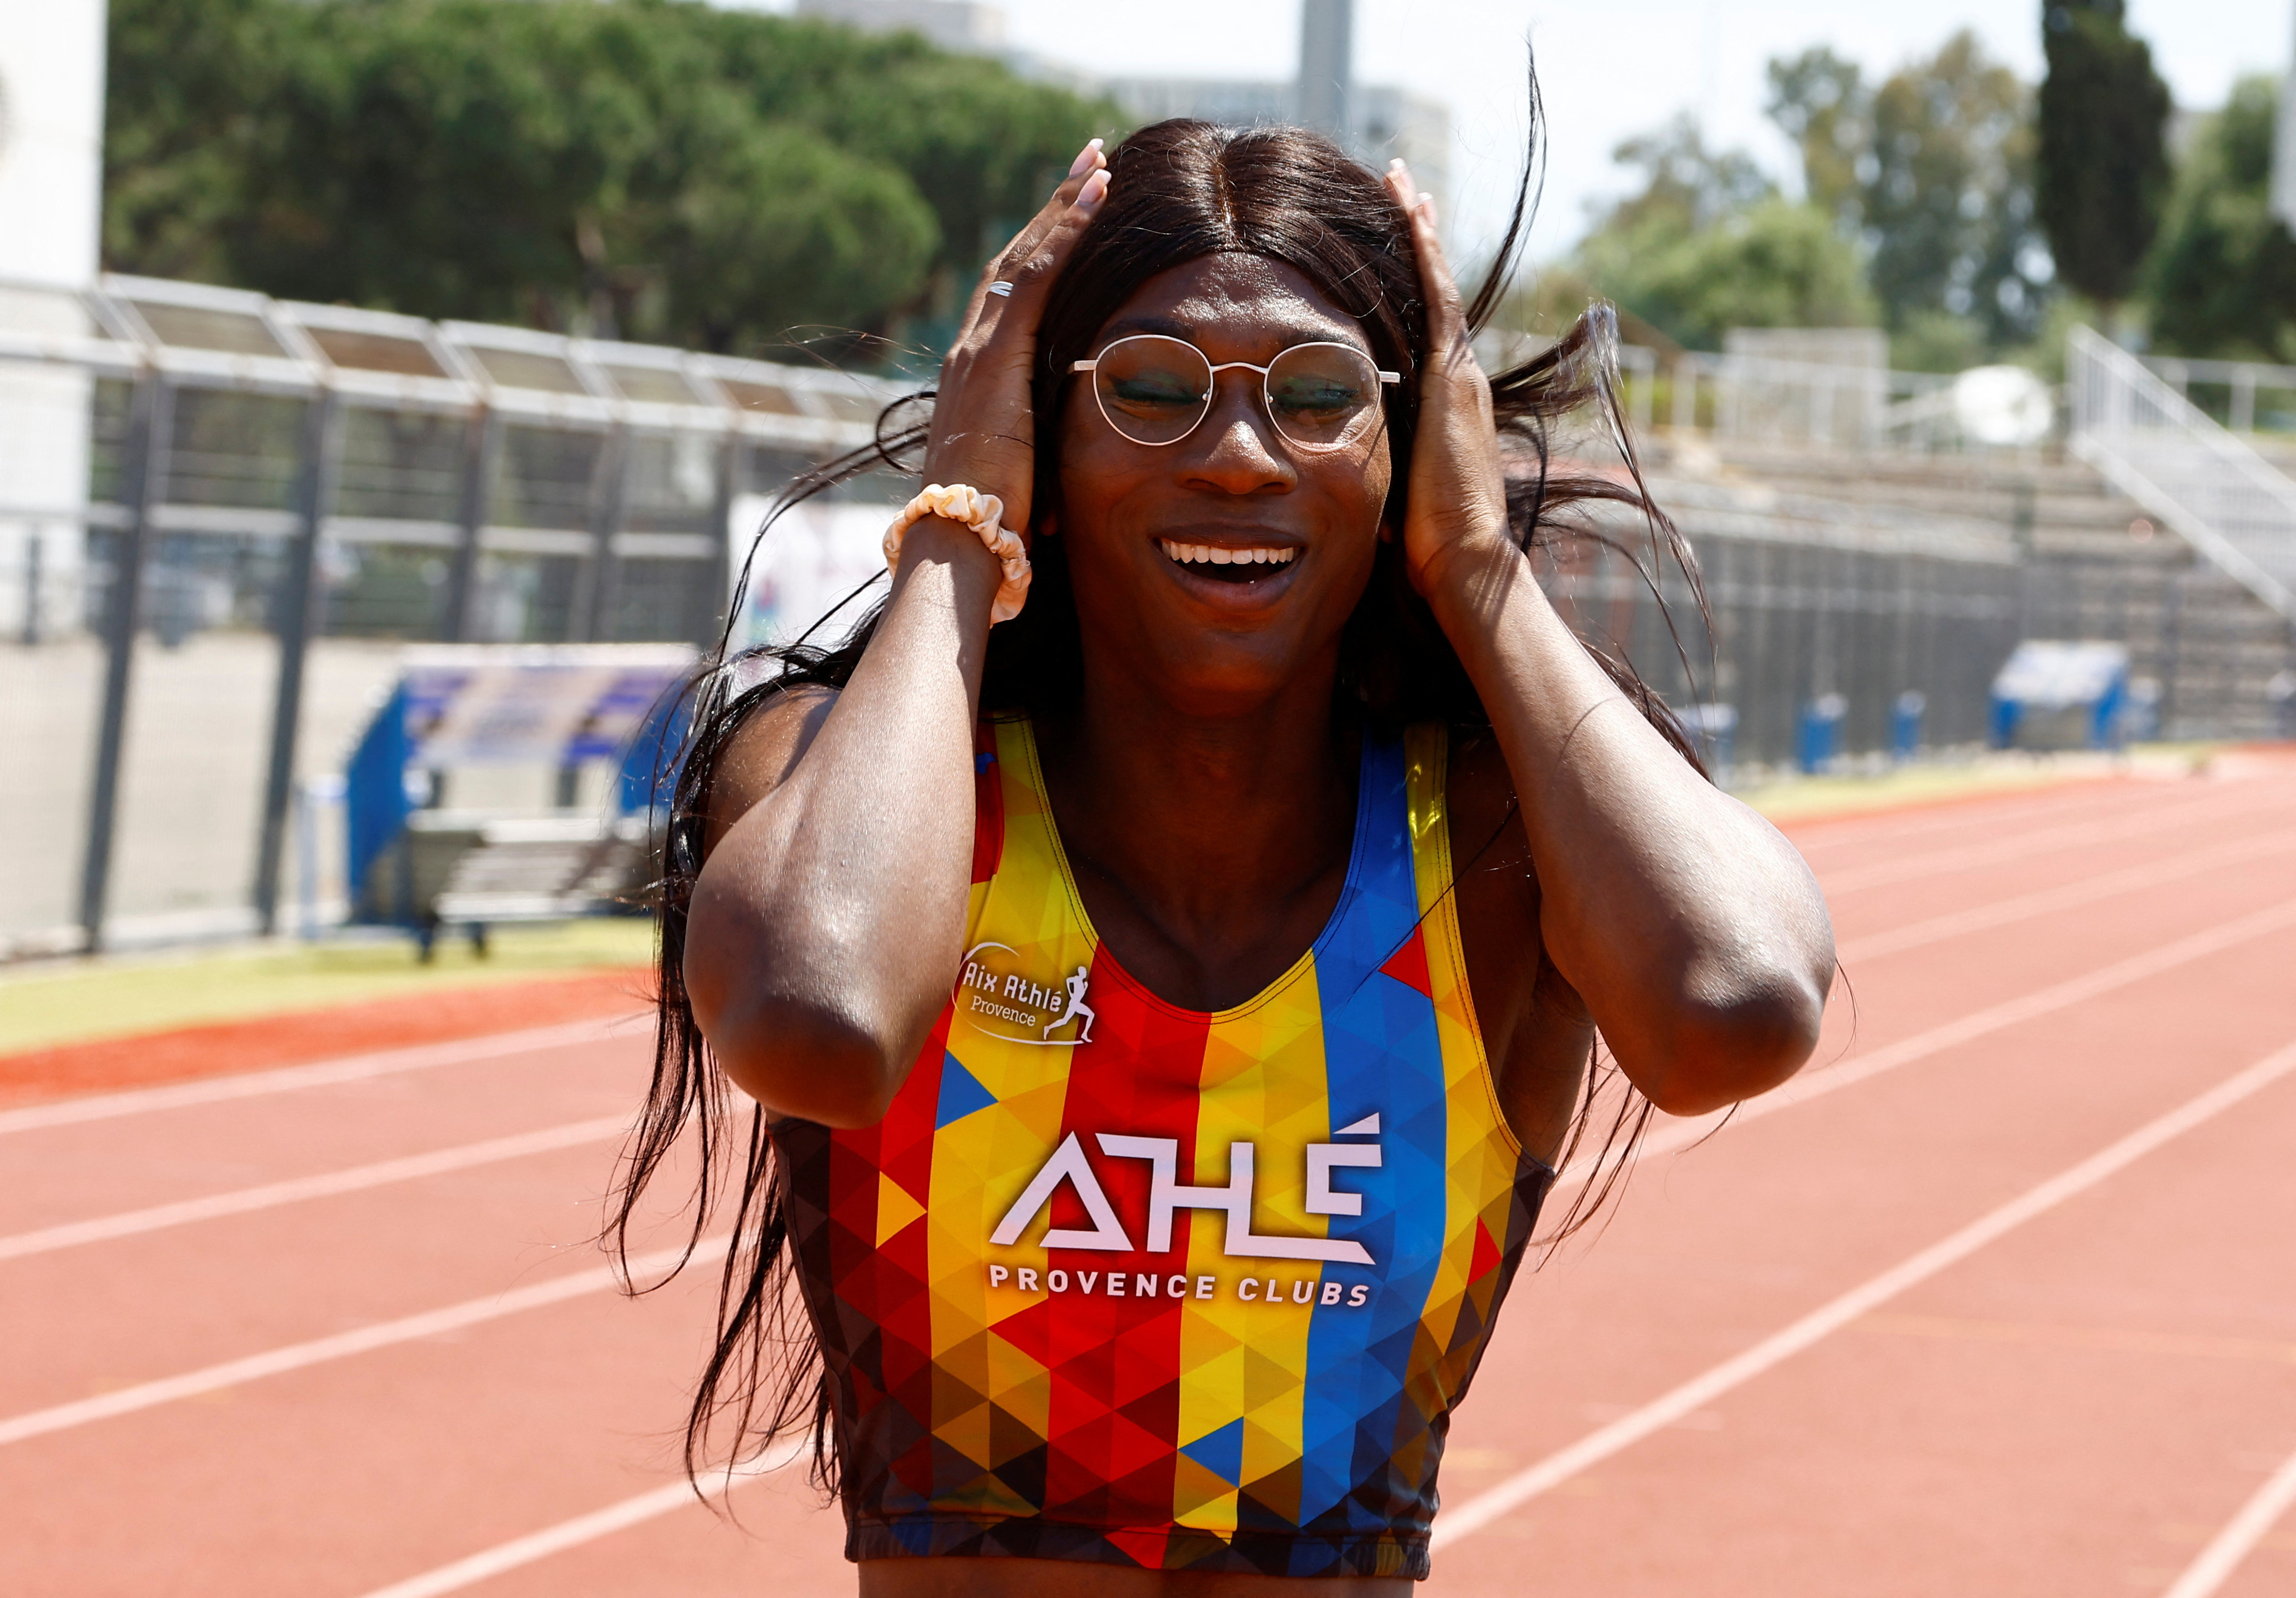 Trans runner barred from Olympics rips World Athletics' decision